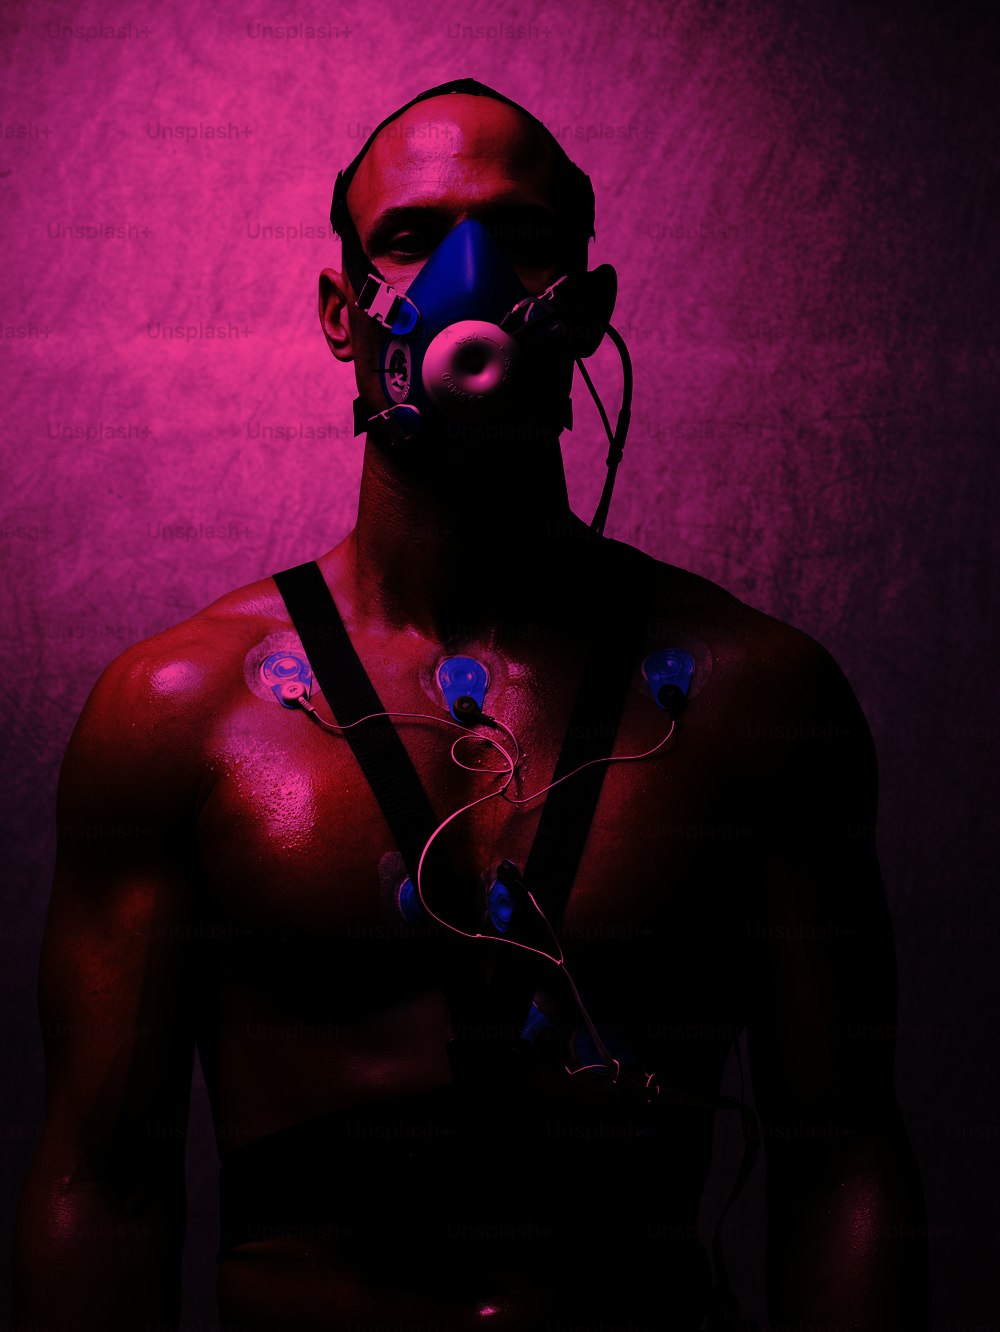 a man wearing a gas mask and harness